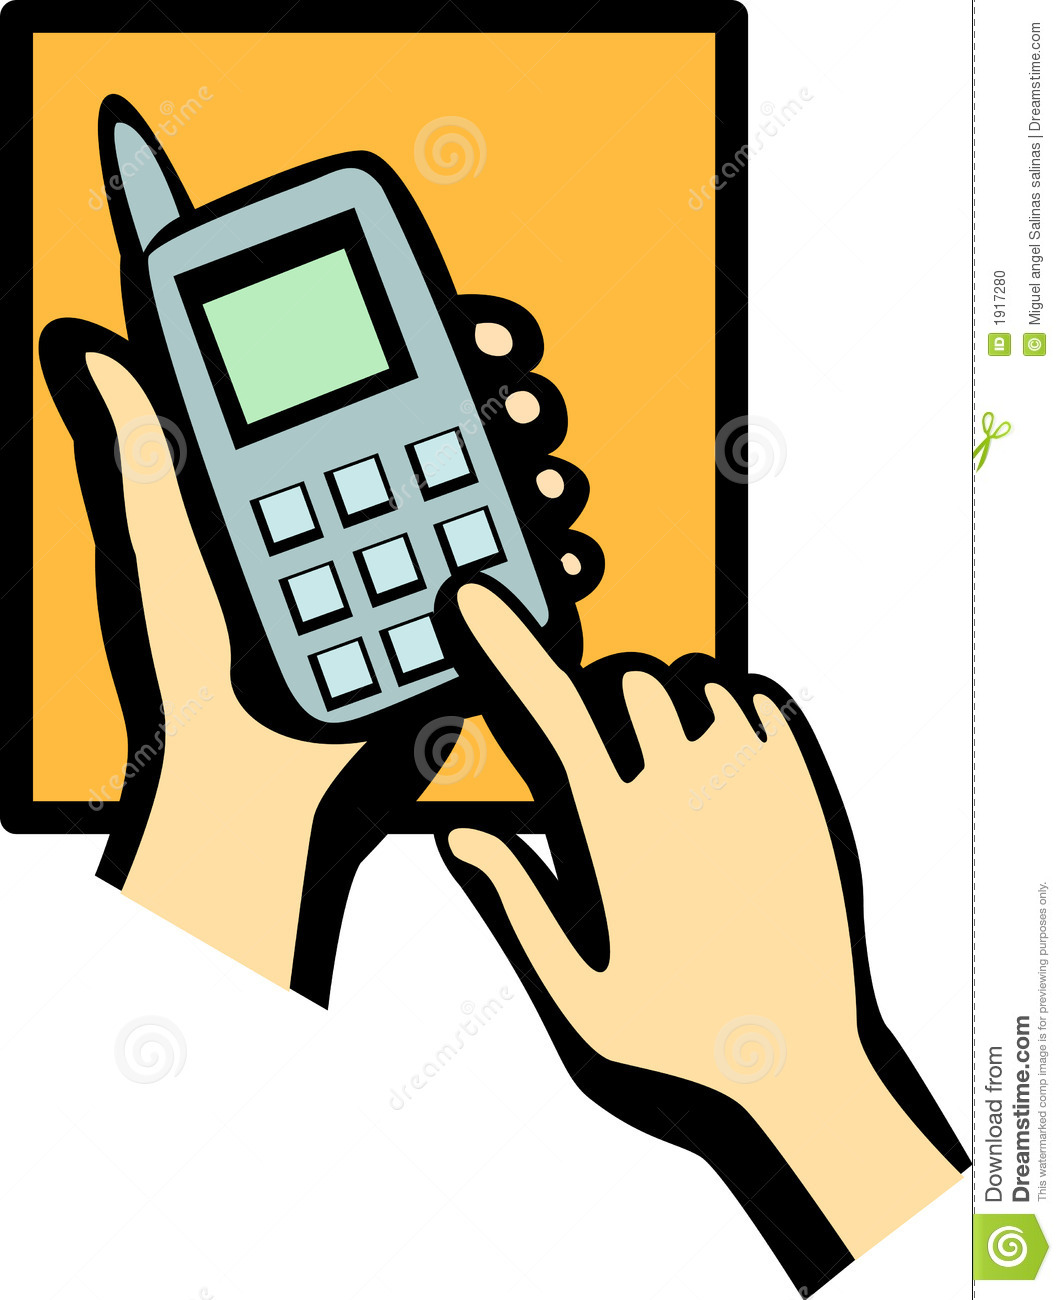 Cell Phone Dialing Vector Illustration Stock Photo   Image  1917280